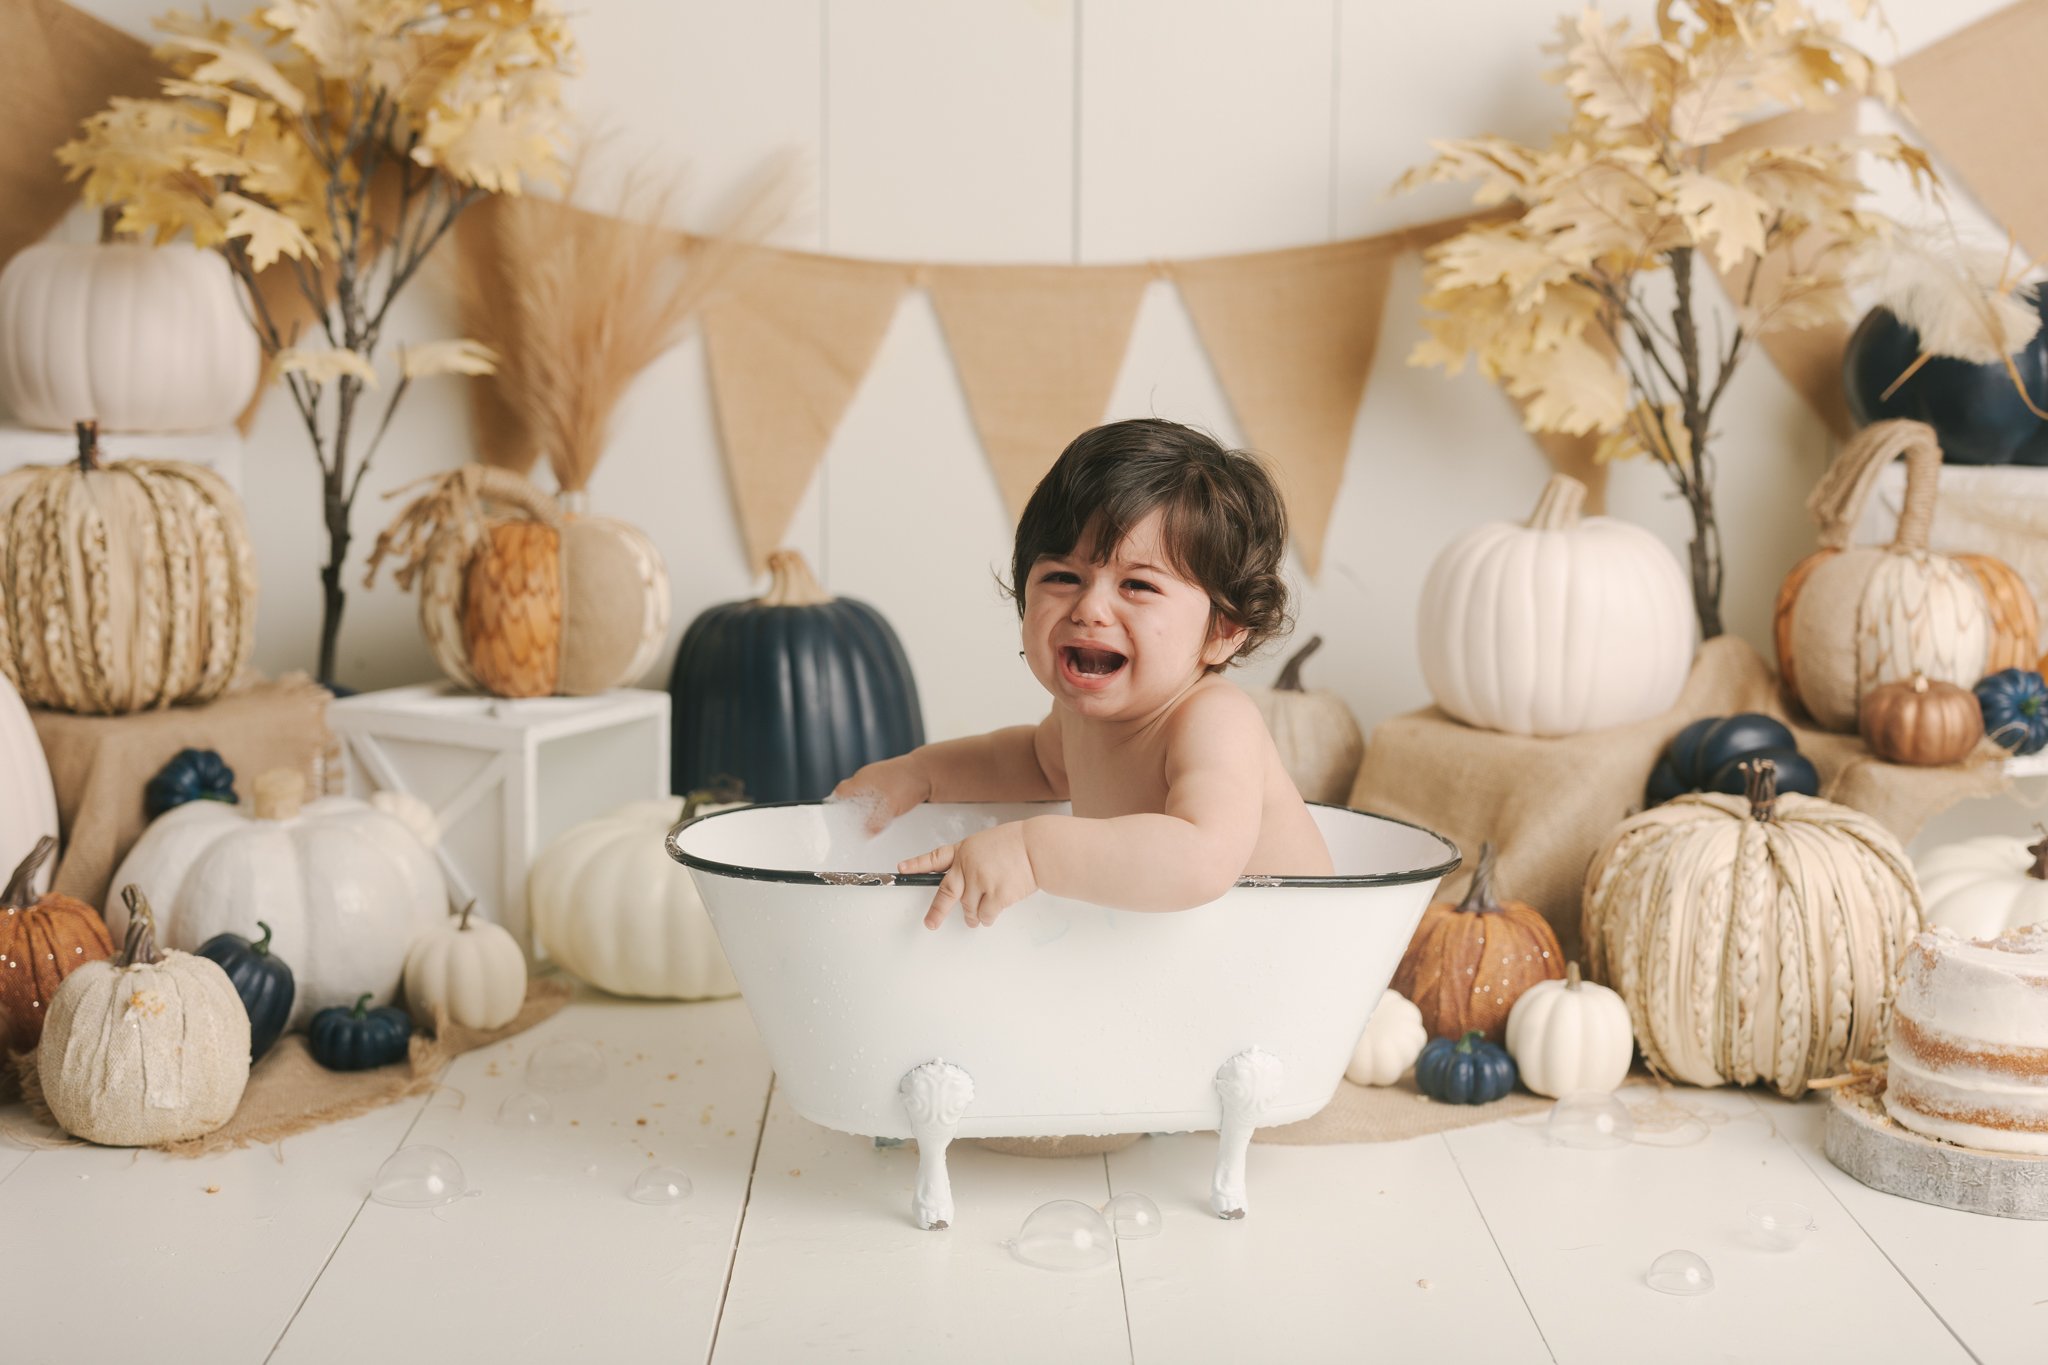 Fall_Pumpkins_Neutral_Navy_Ivory_Frist_Birthday_Boy_Smash_and_Splash_Session_Cake_Studio_by_Erika_Child_and_Family_Photographer_for_Christie_Leigh_Photo_in_Cortland_OH_Ohio_Trumbull_County_005.jpg